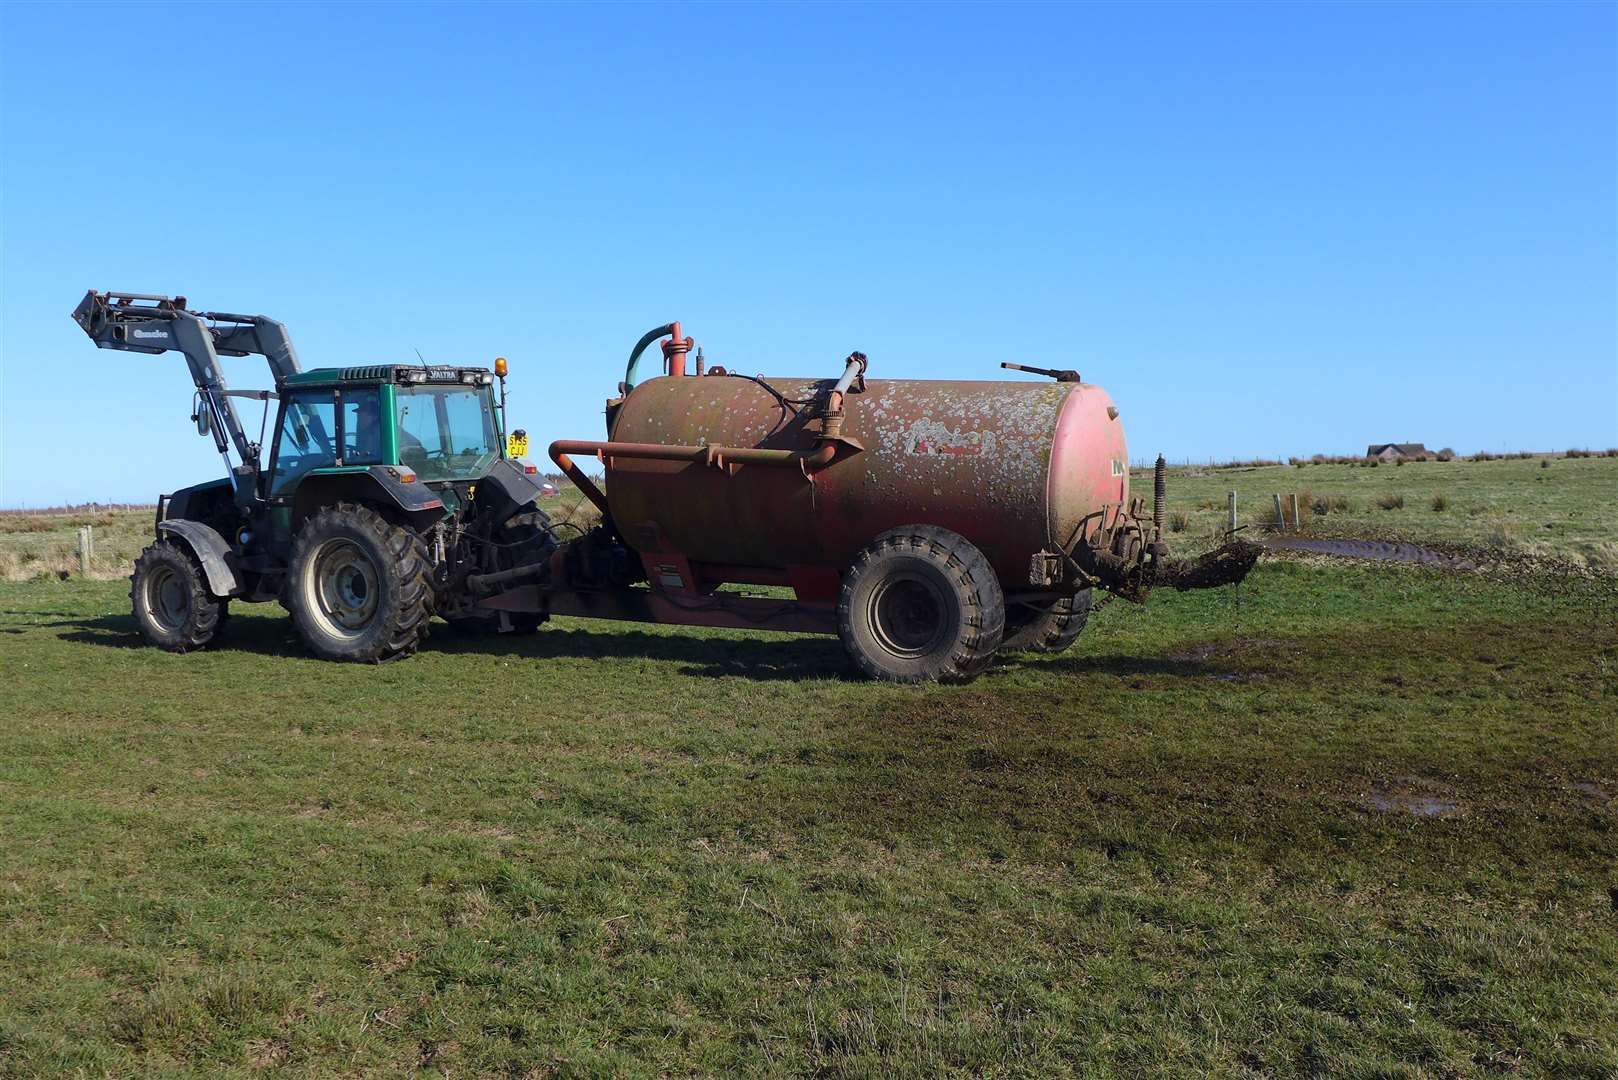 Slurry spreading will be subject to new regulation.